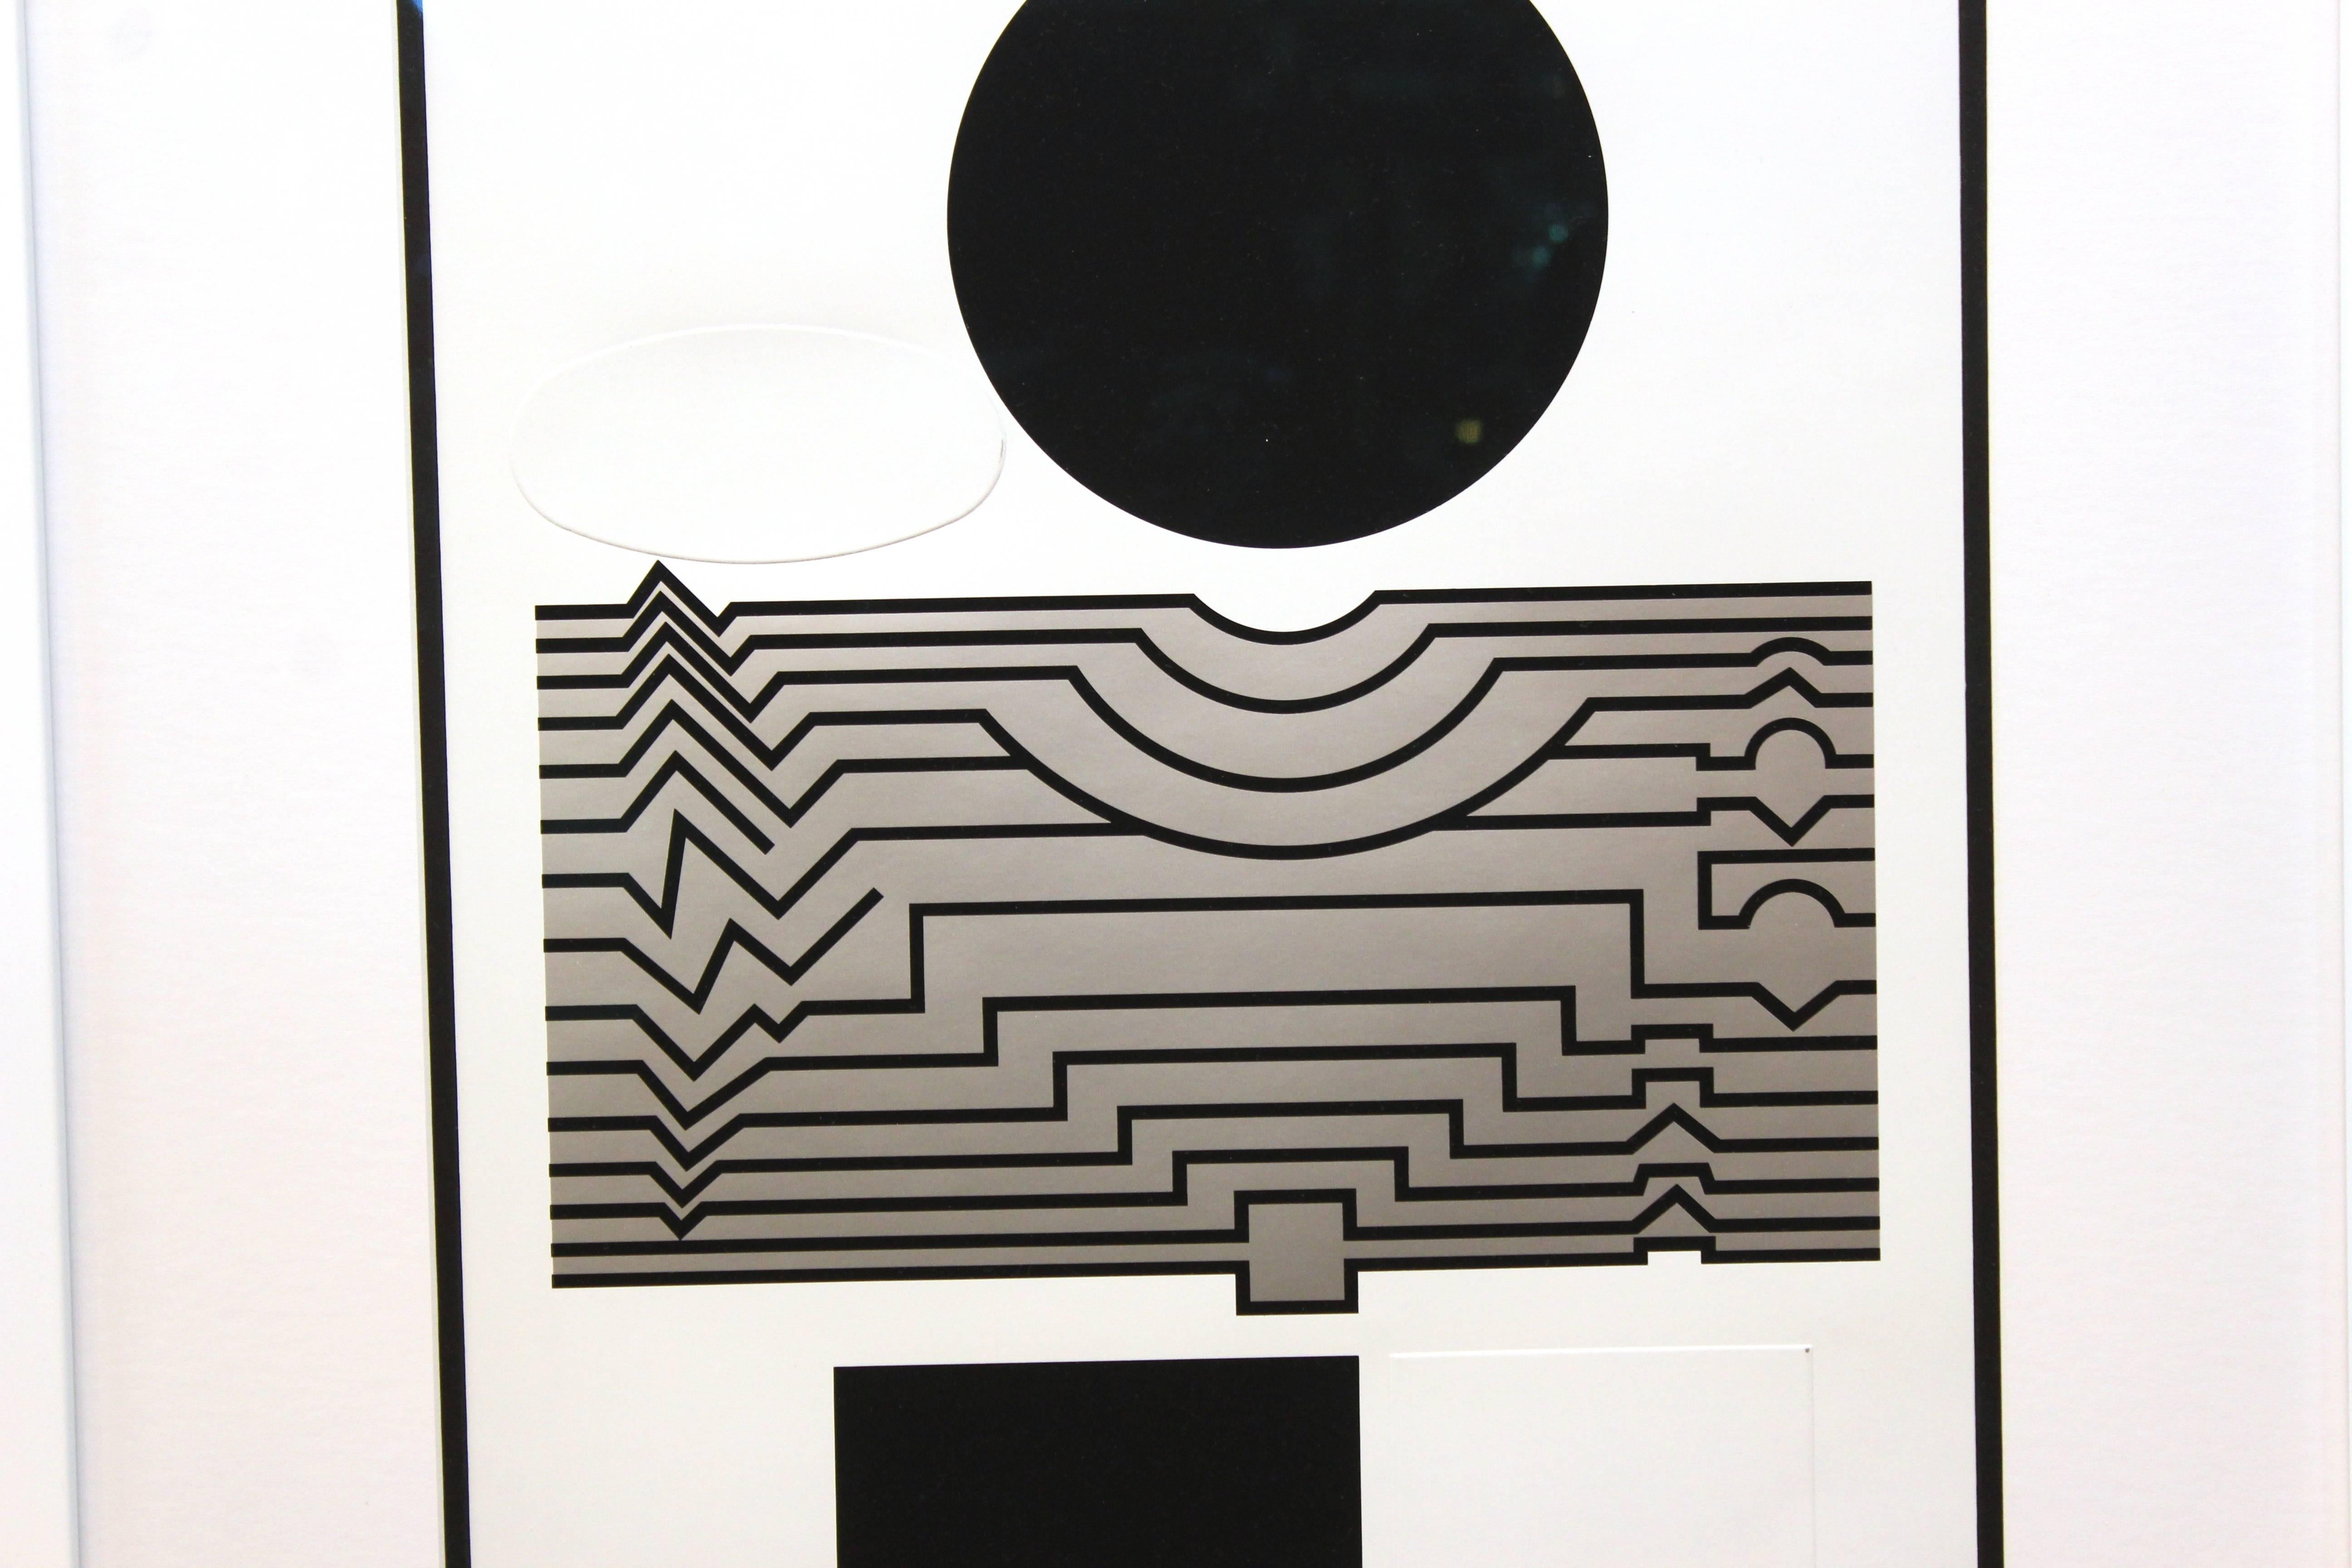 Victor Vasarely serigraph in white, gray and black. Work of the 